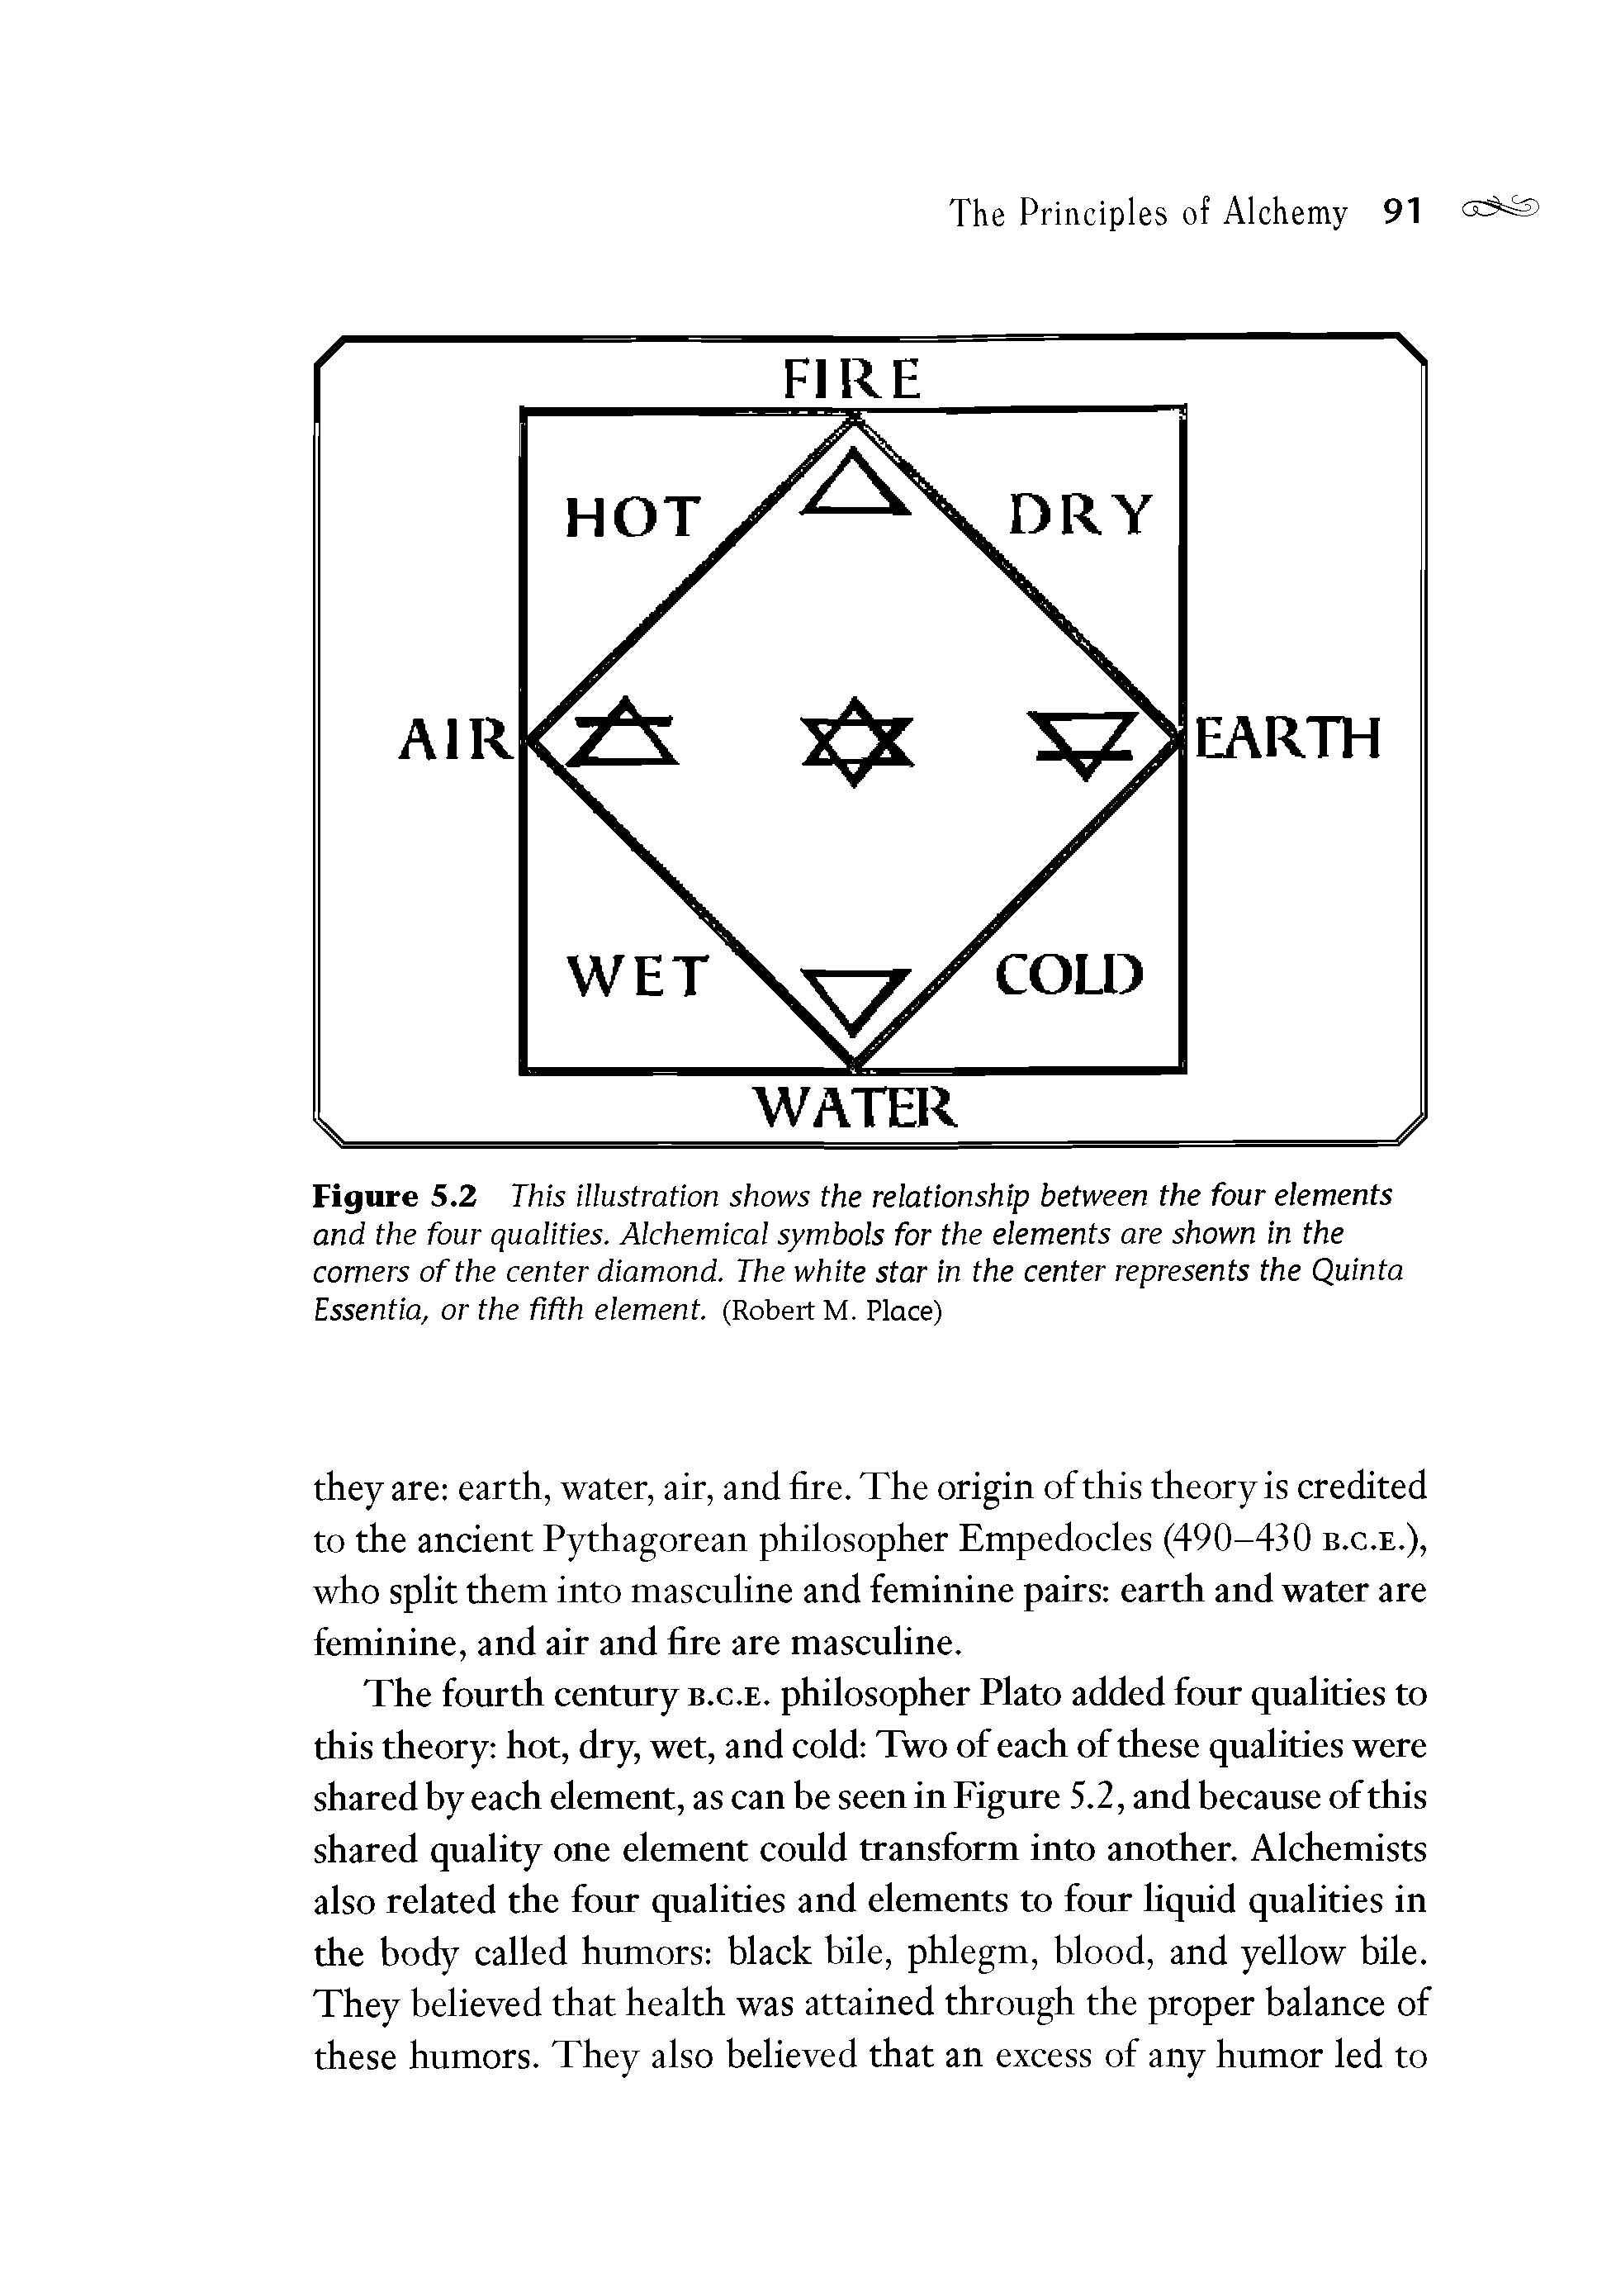 Figure 5.2 This illustration shows the relationship between the four elements and the four qualities. Alchemical symbols for the elements are shown in the corners of the center diamond. The white star in the center represents the Quinta Essentia, or the fifth element. (Robert M. Place)...